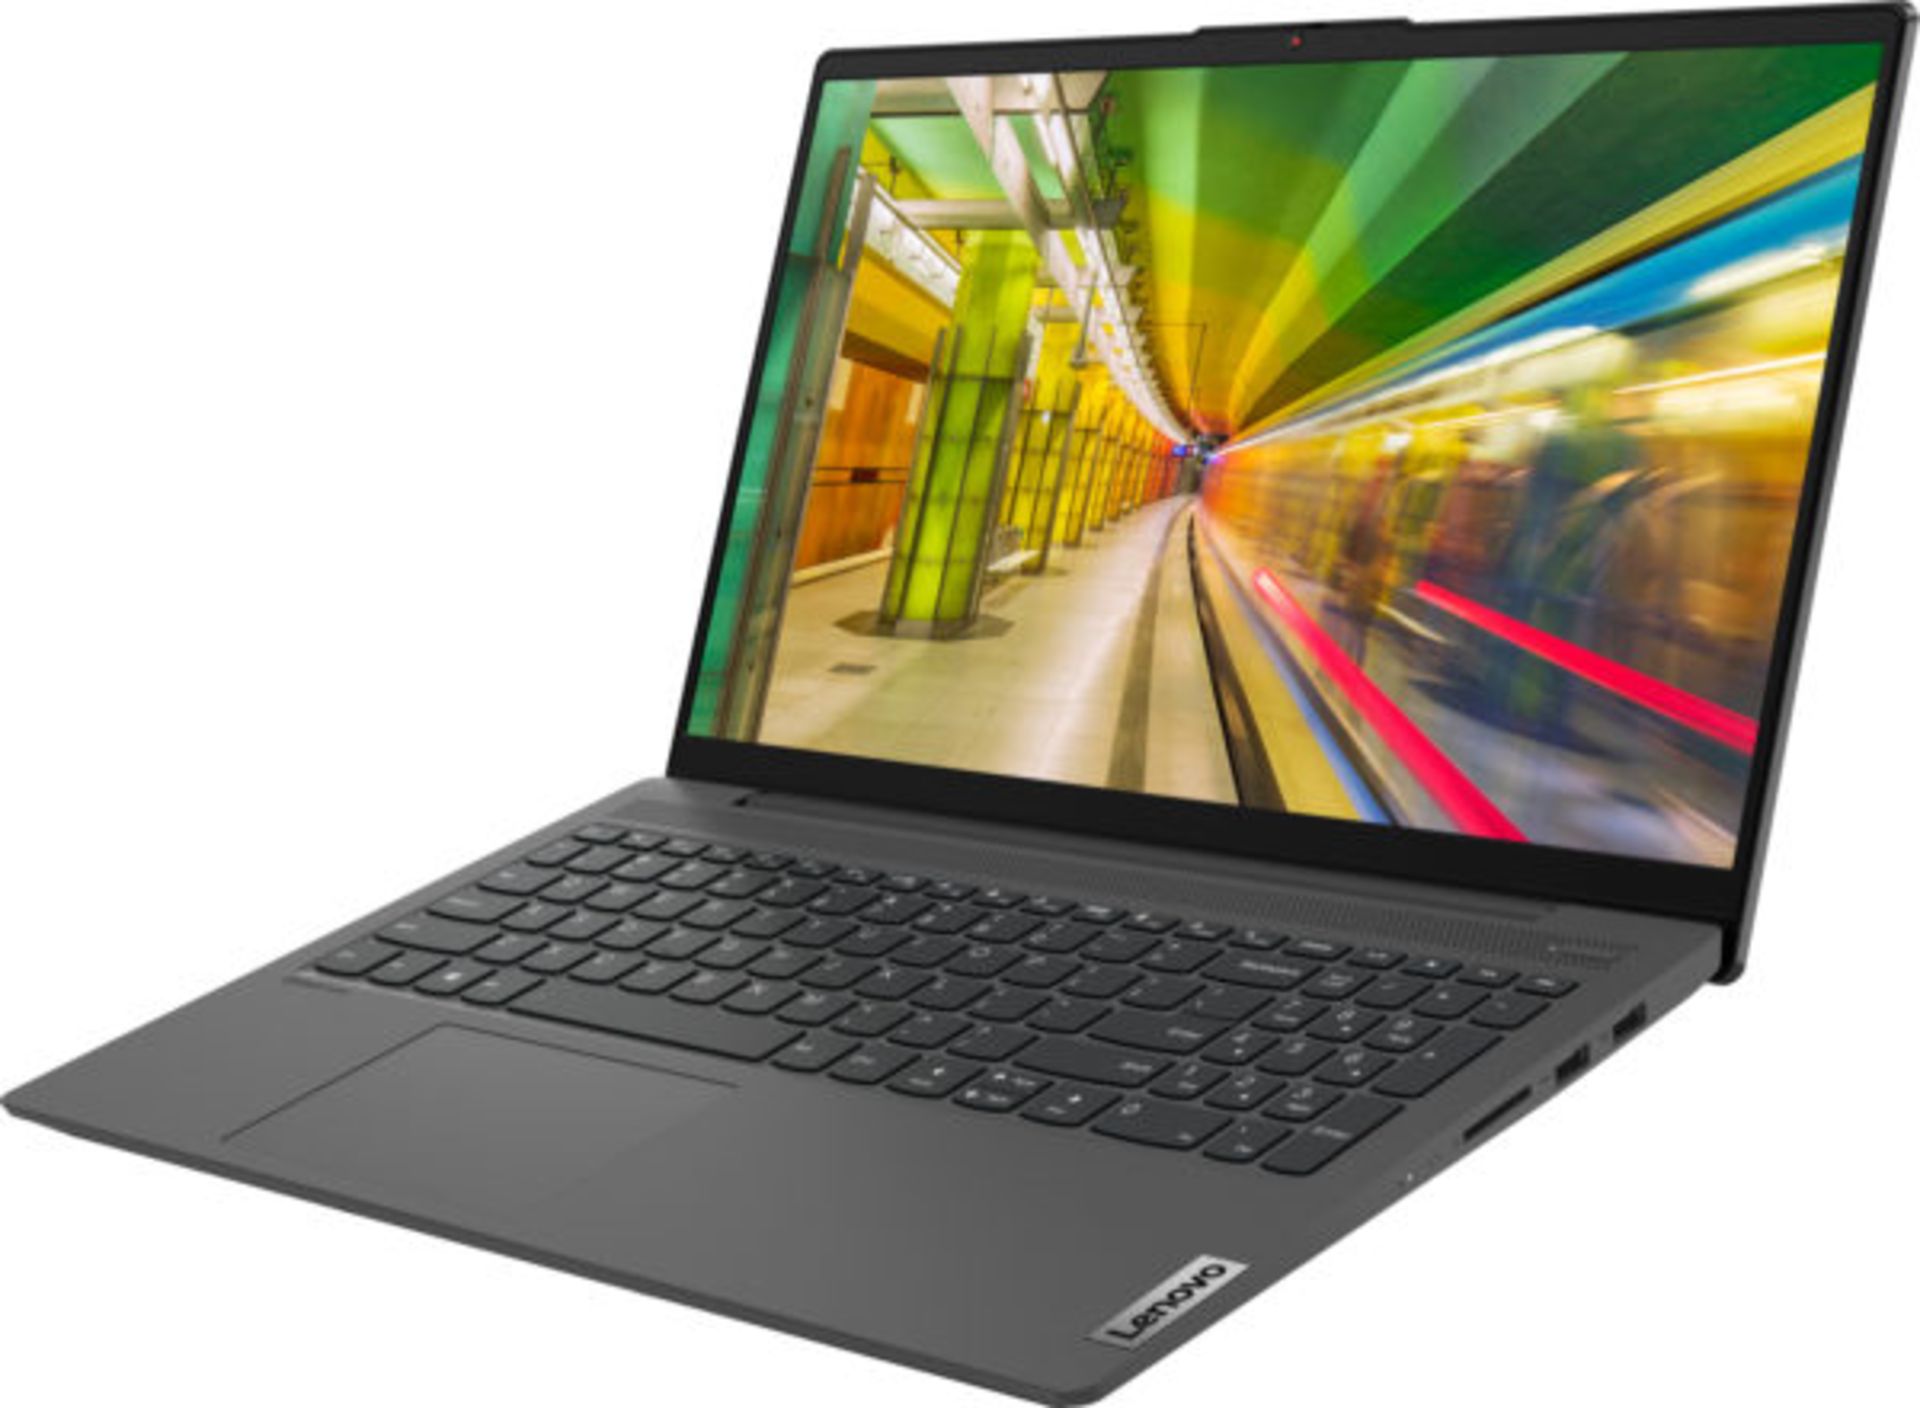 1 BOXED LENOVO 15" 256GB SSD, INTEL CORE I5-1135G7, 8GB RAM, 82FG00X3UK, WITH CHARGER RRP Â£699 (